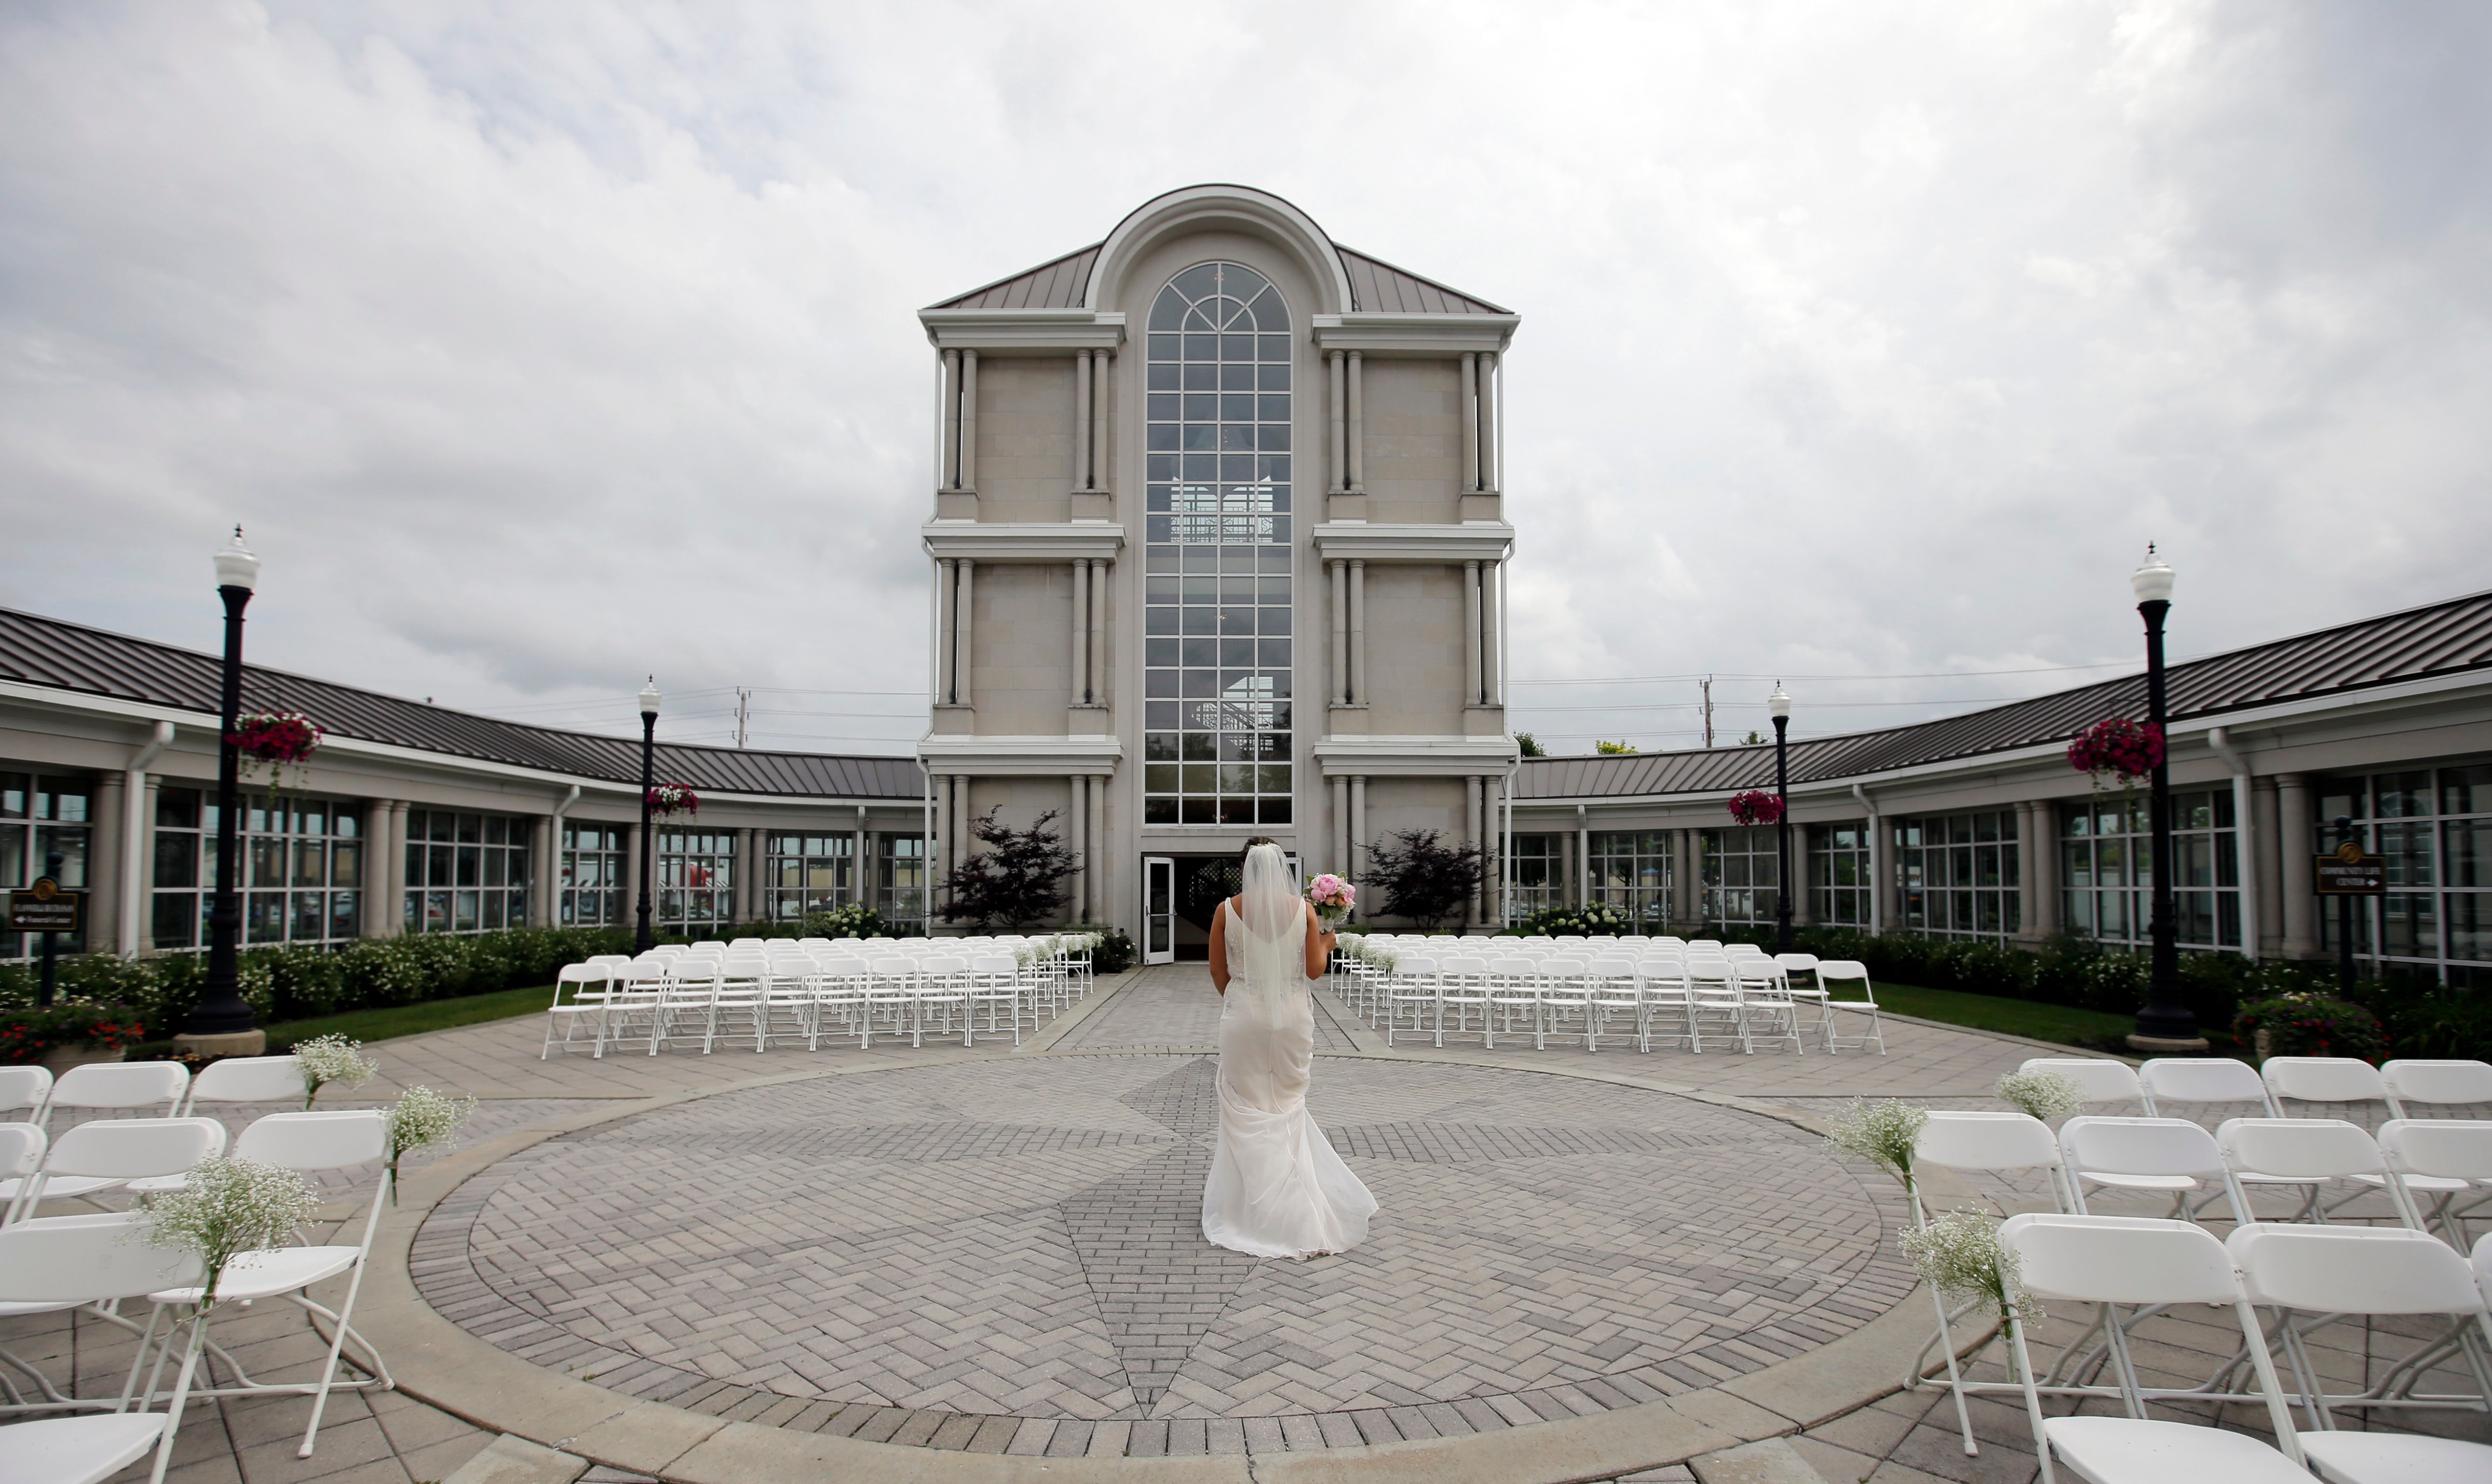 Danessa Molinder walks toward the Crystal Tower for photos before her wedding at the Community Life Center, which sits on cemetery land near a funeral home in Indianapolis. (Darron Cummings—AP)